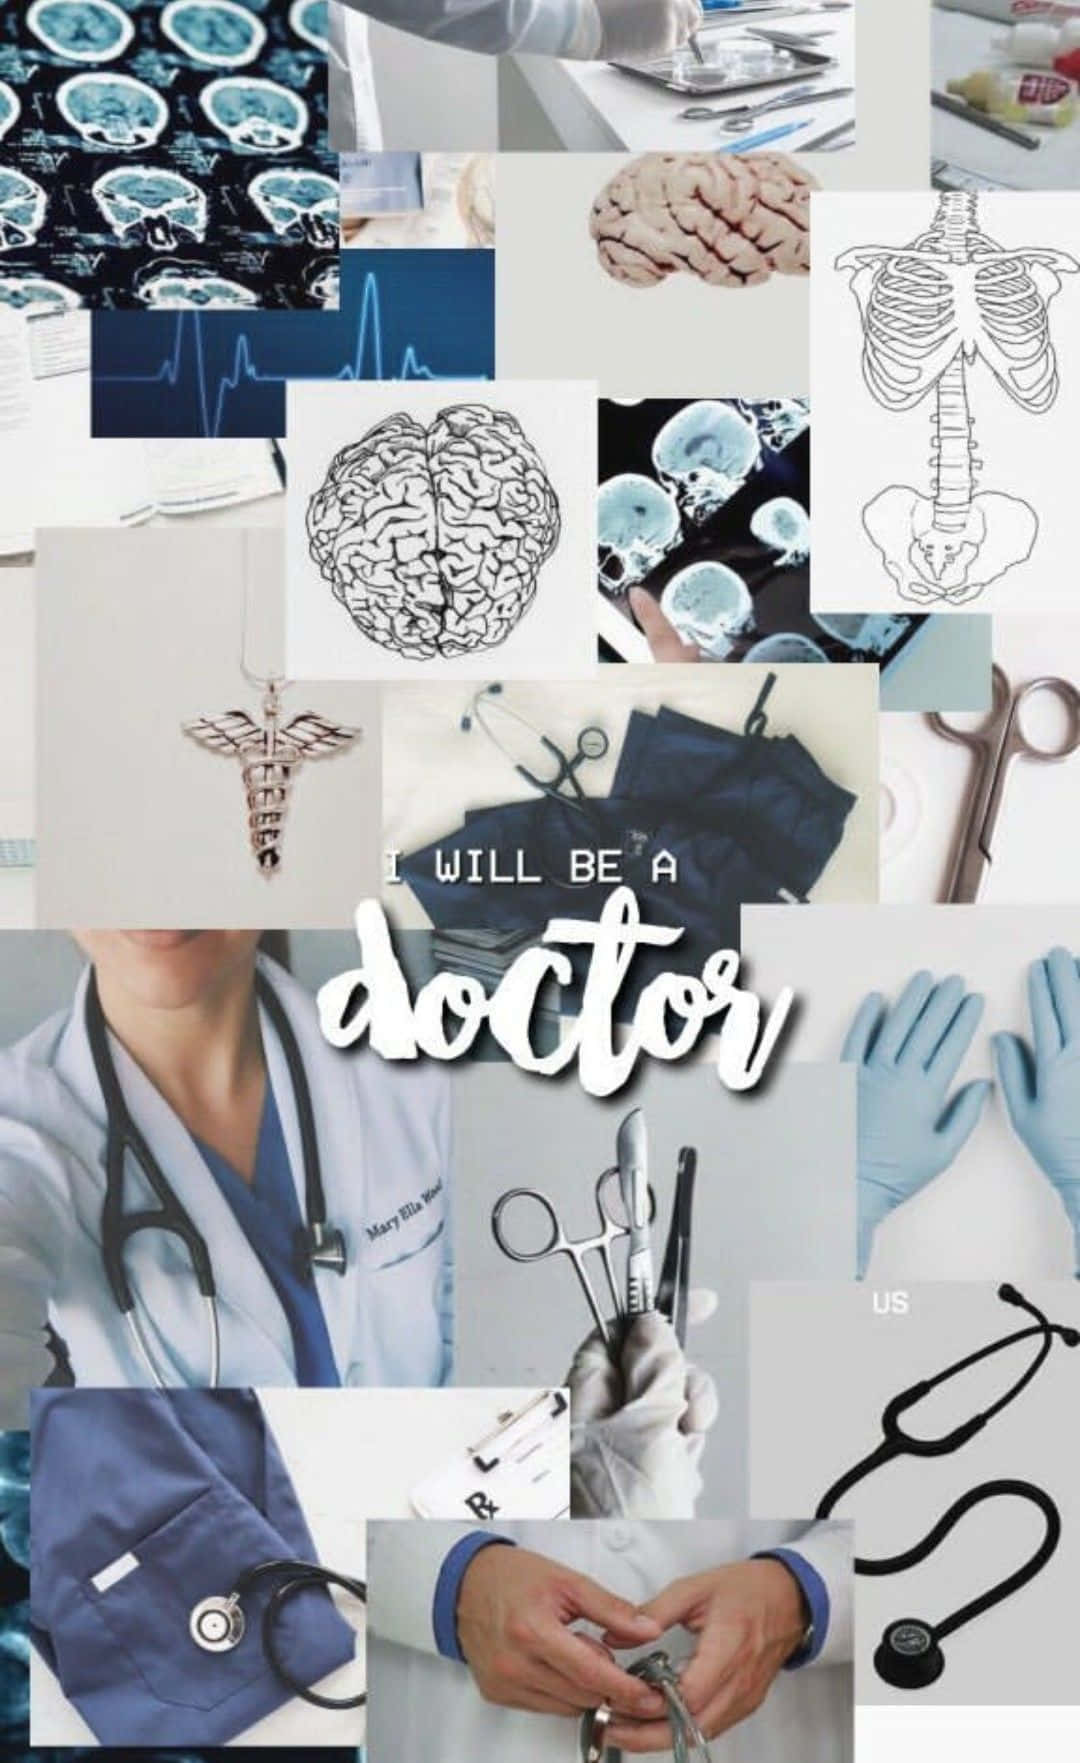 A Collage Of Medical Images With The Words Doctor